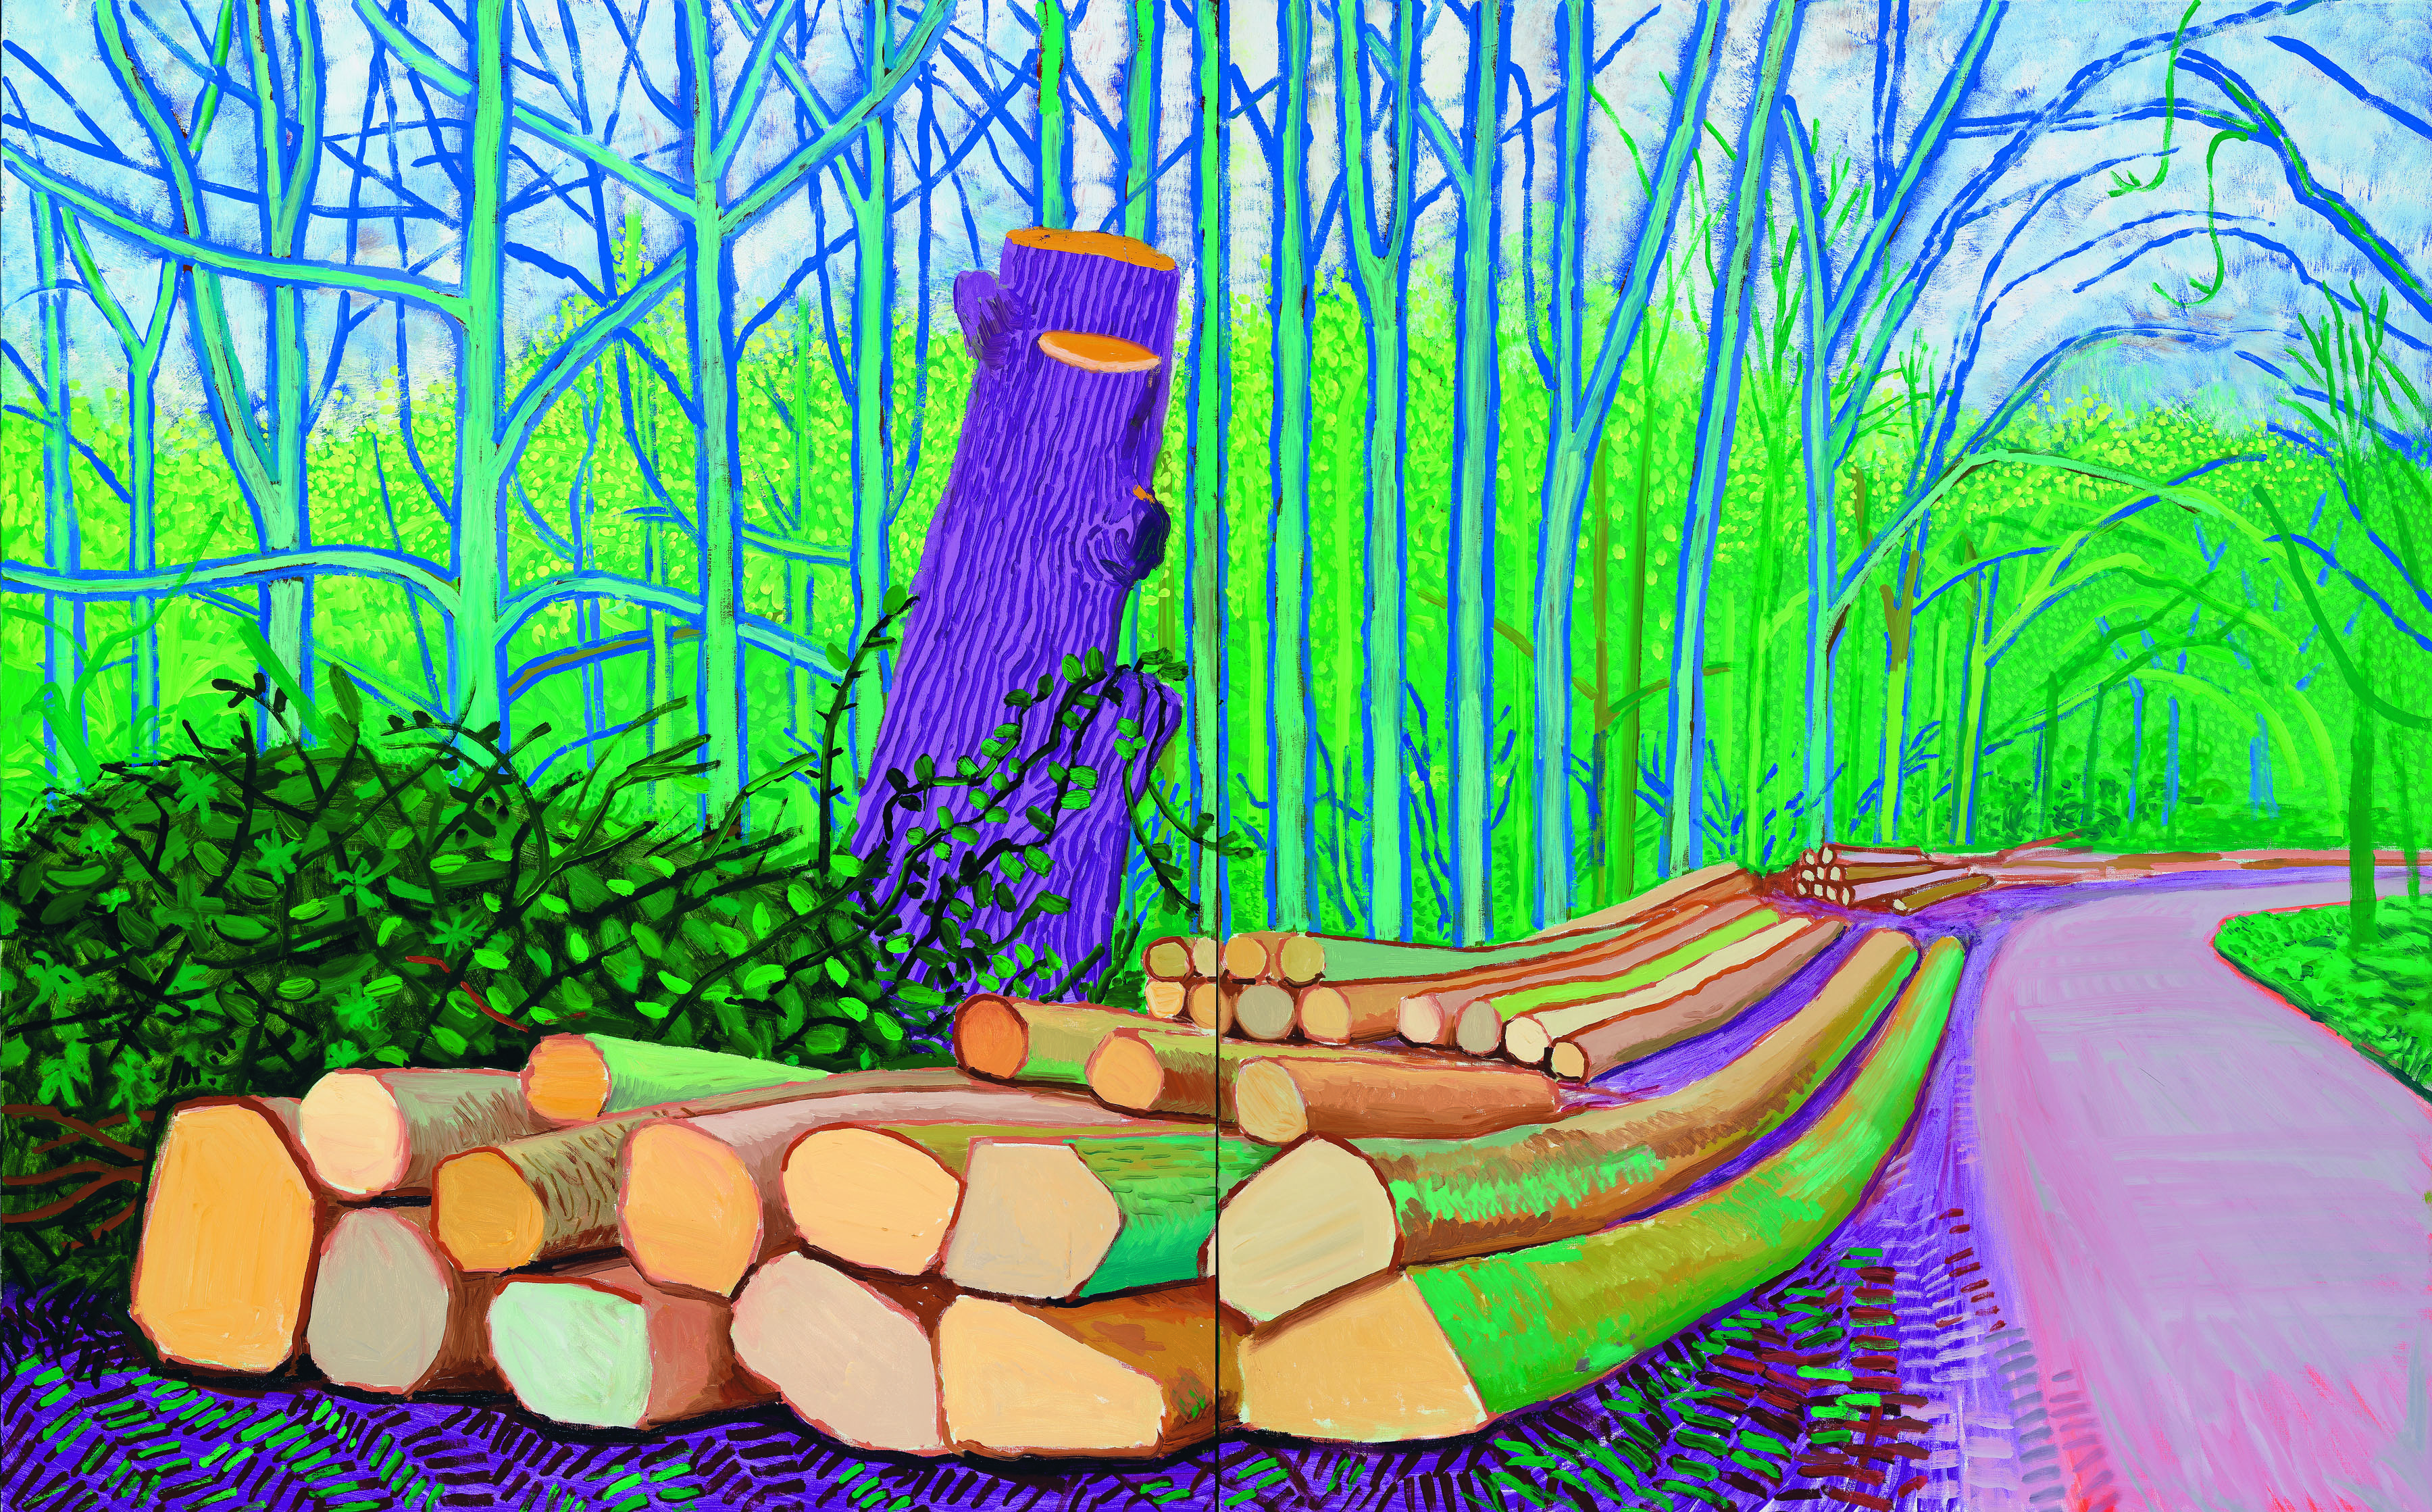 Not that young, nor a Swiss, but also talking to Hodler: David Hockney's "Felled Trees on Woldgate" (2008)